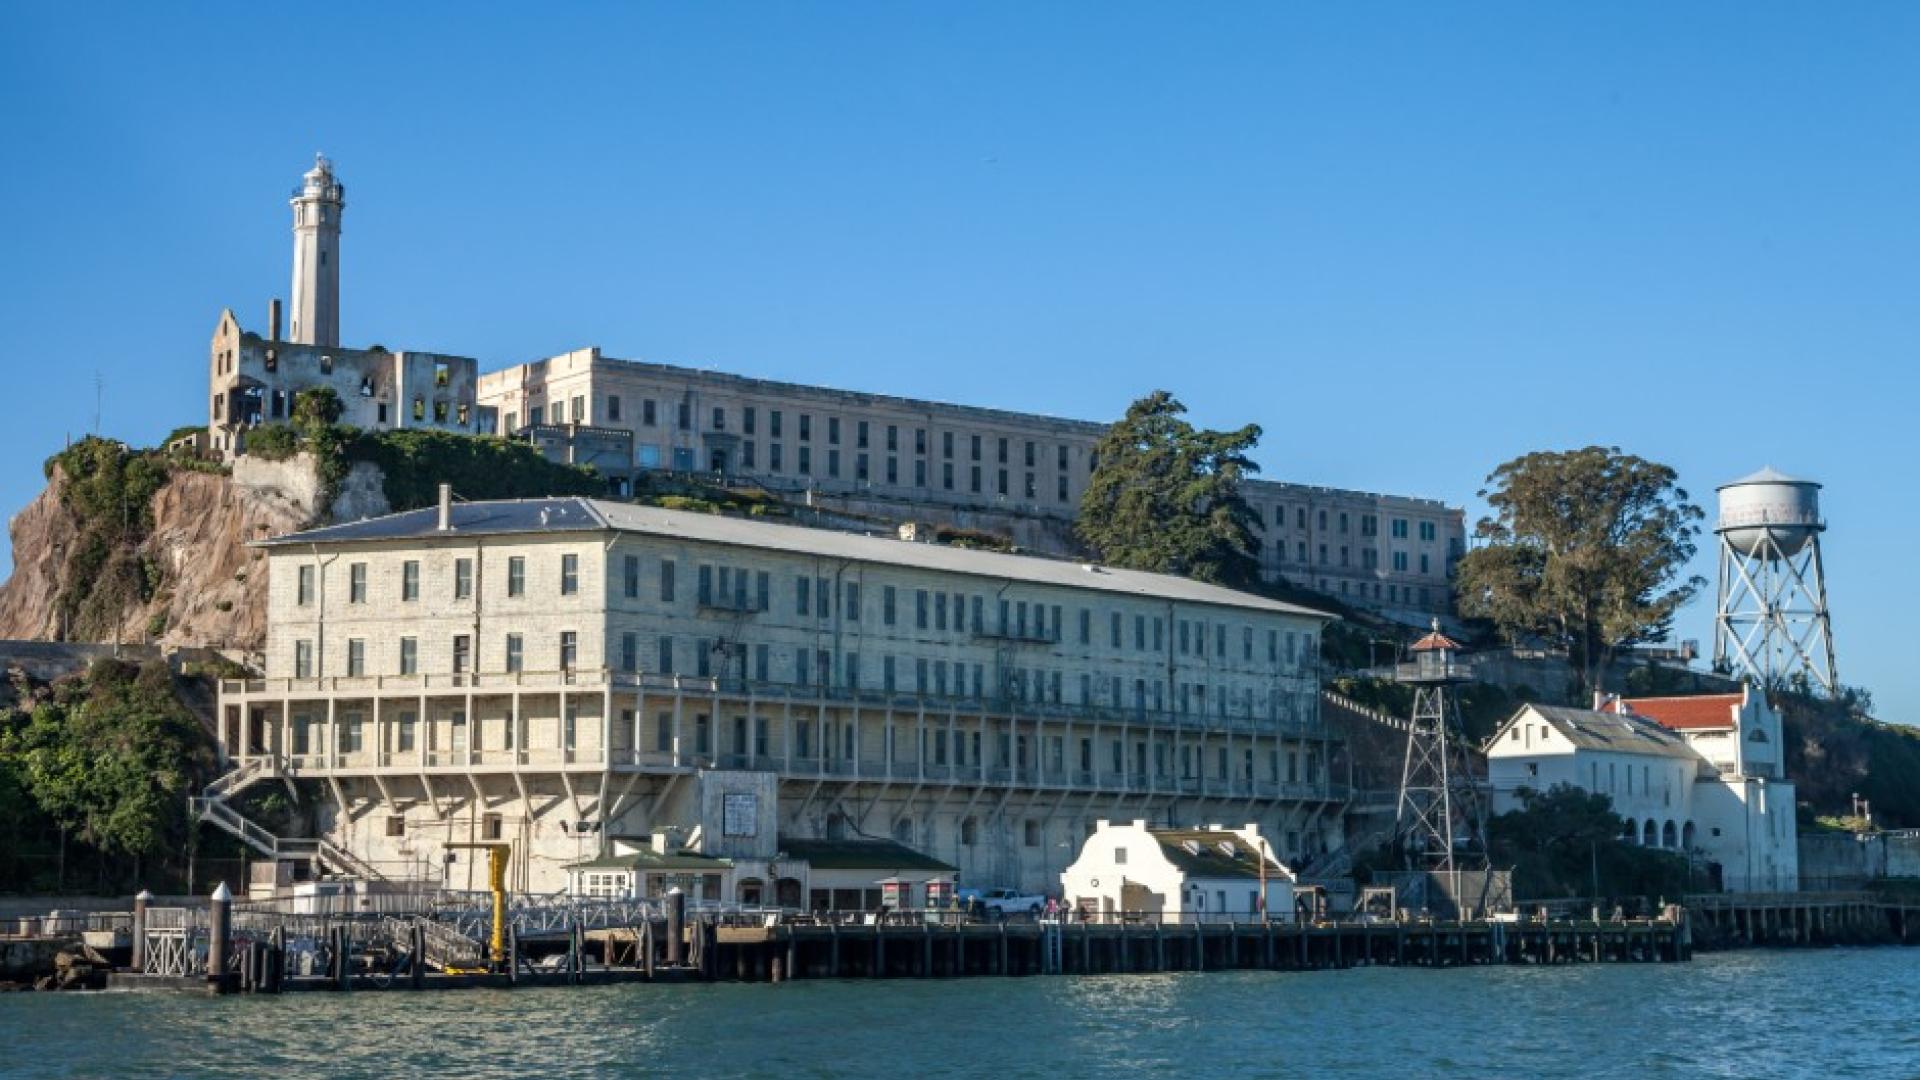 A view of the dock at Alcatraz Island with the cell house and lighthouse in the background